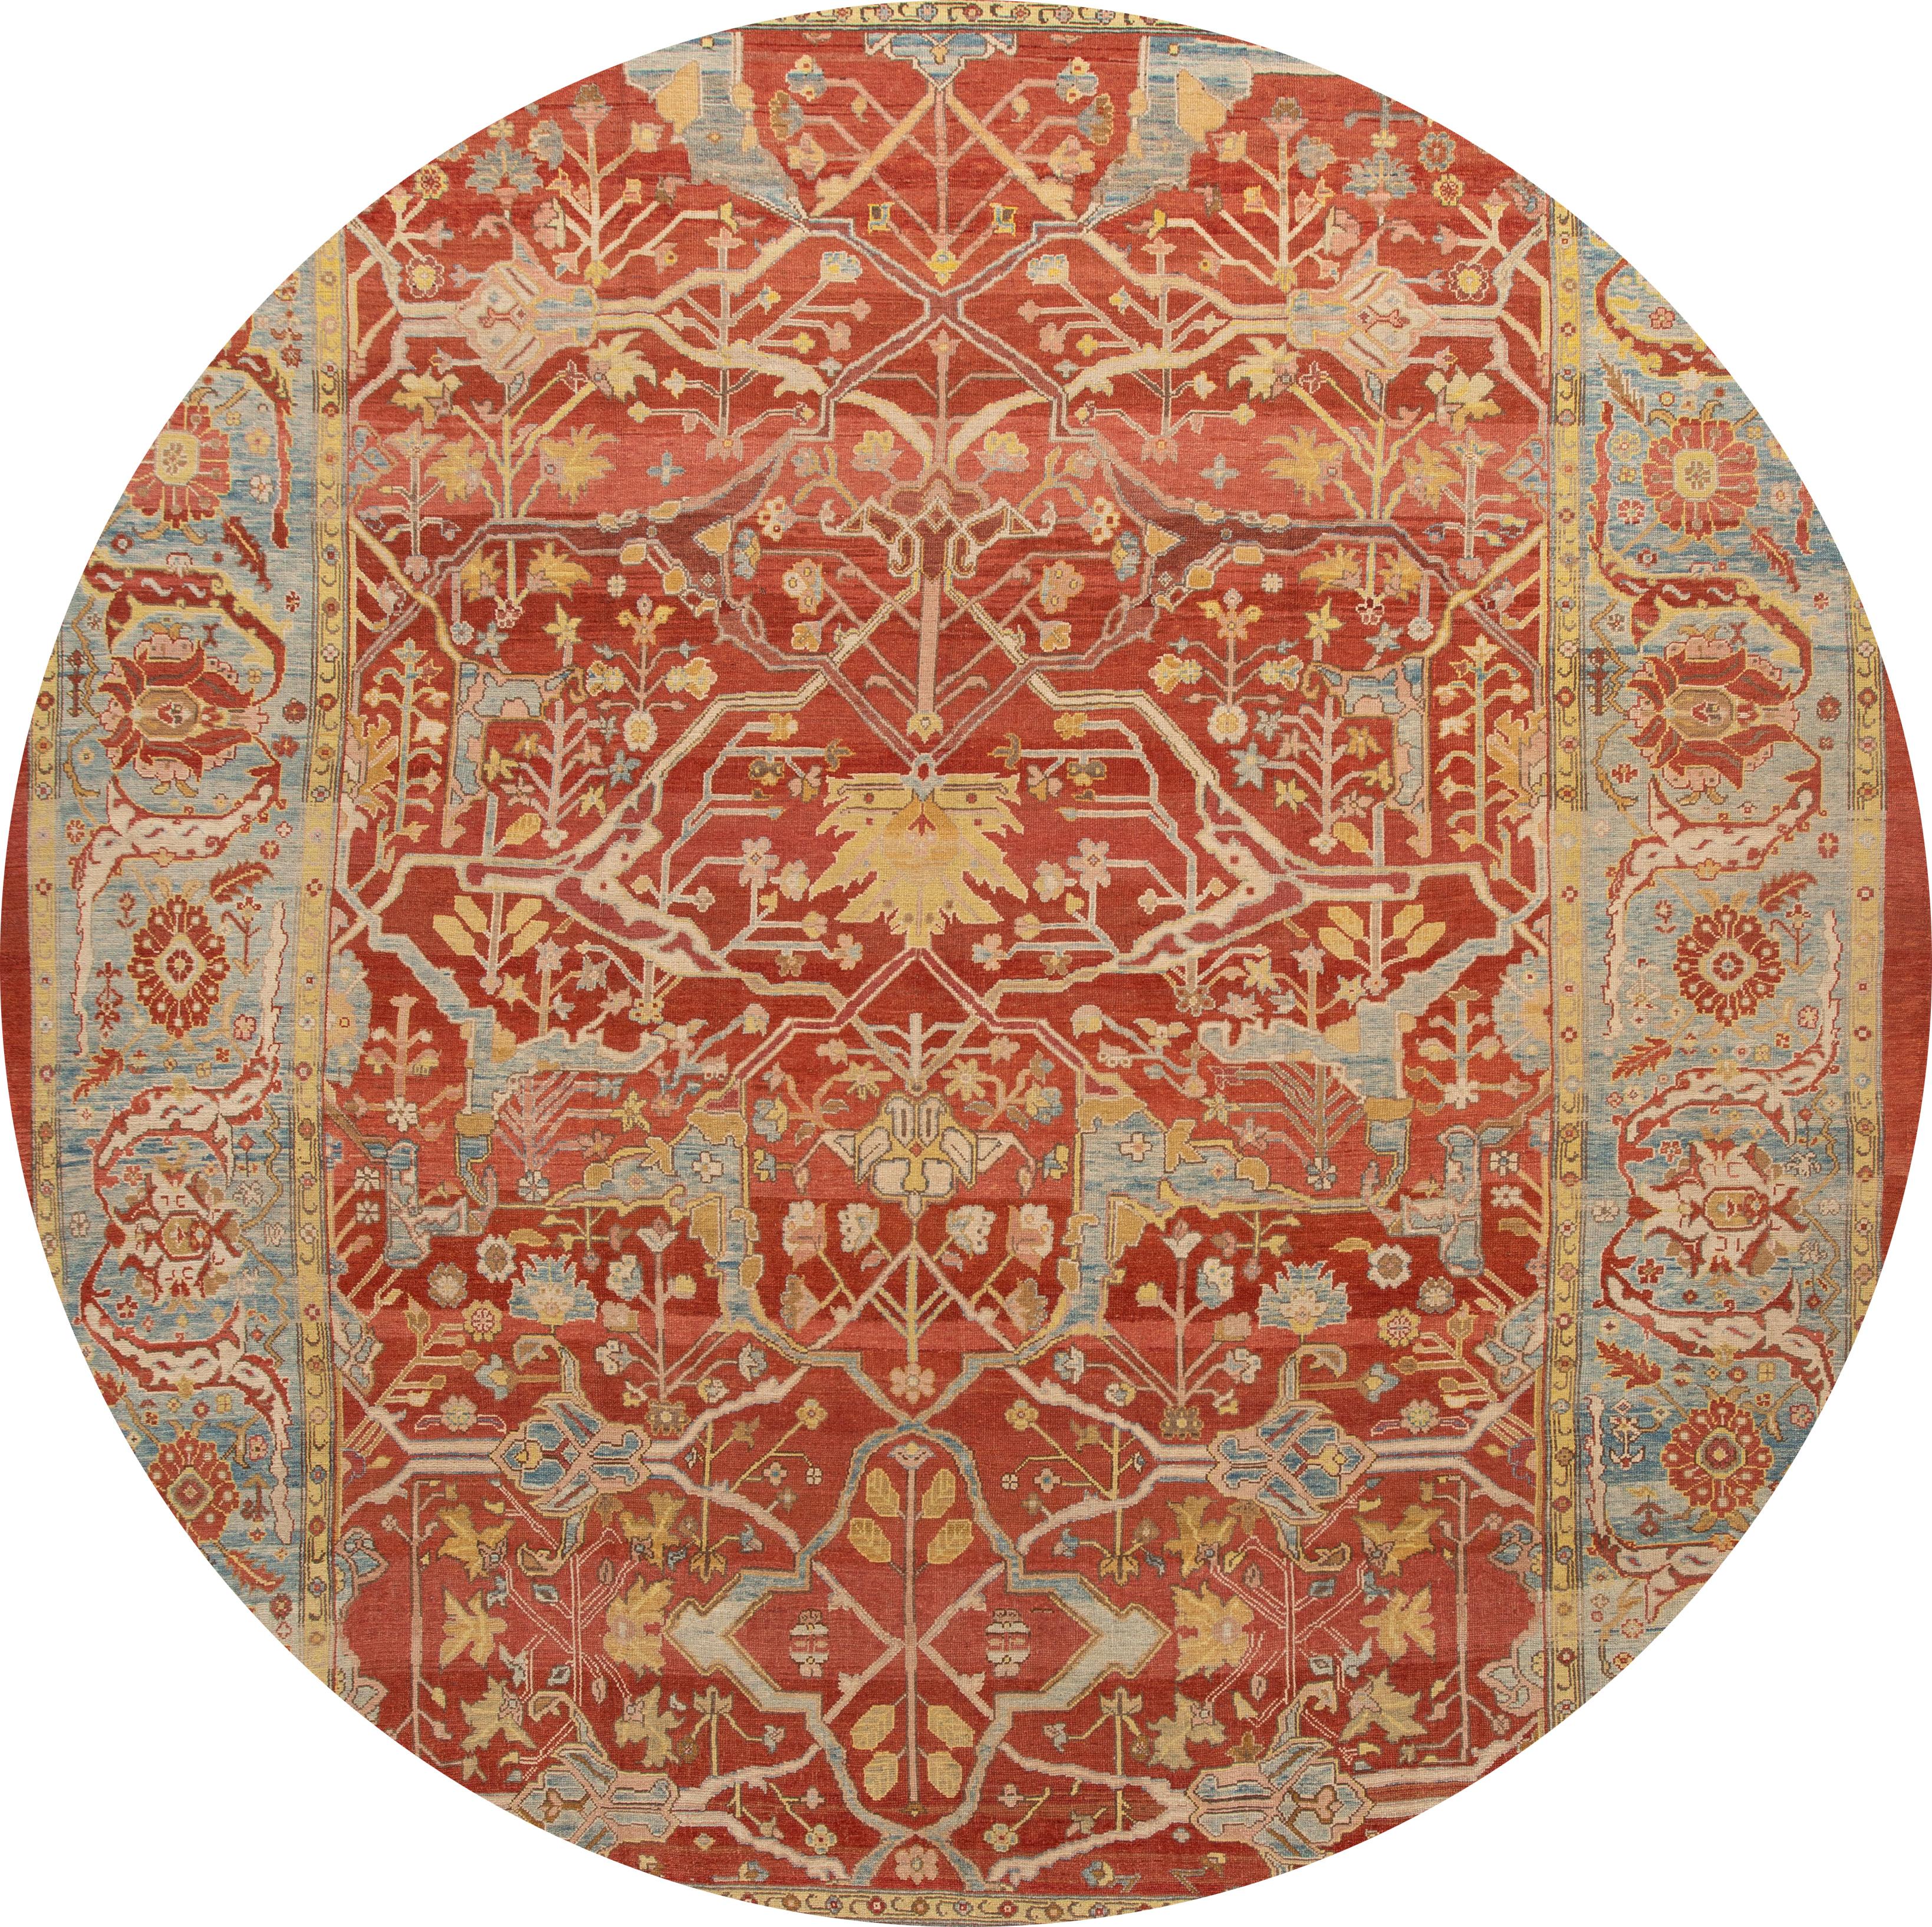 Beautiful Vintage style oversize Bakshaish wool rug with a rust field, and multi-color accents in an all-over geometric design.

This rug measures 13' 7